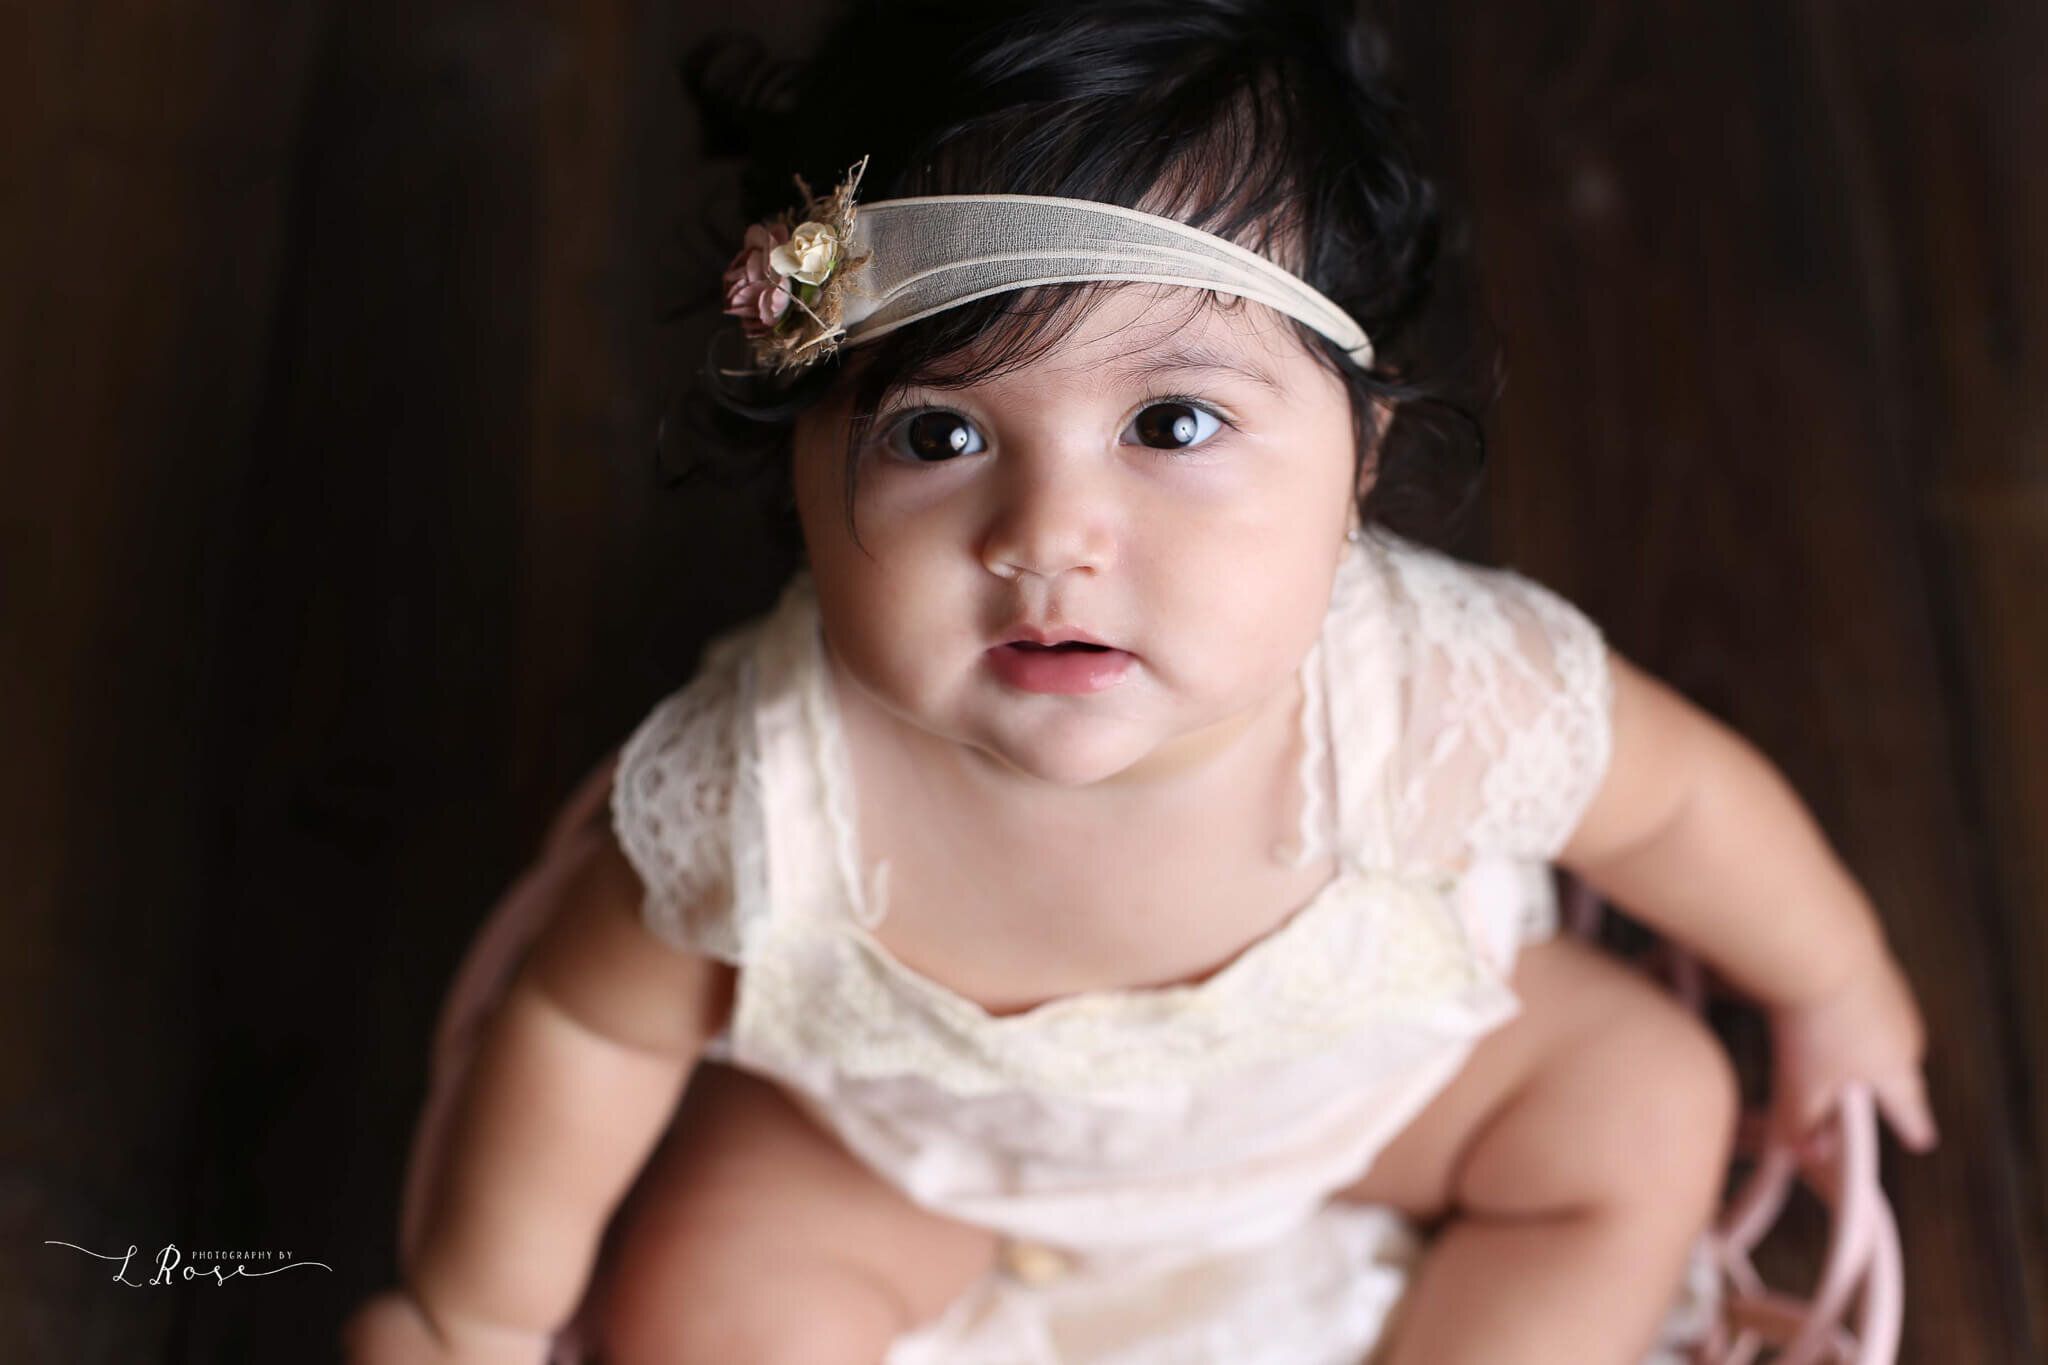  A picture from above of a sweet girl in a flowered headband and lacy dress, looking up with her dark eyes as she celebrates a milestone from a baby photo session 